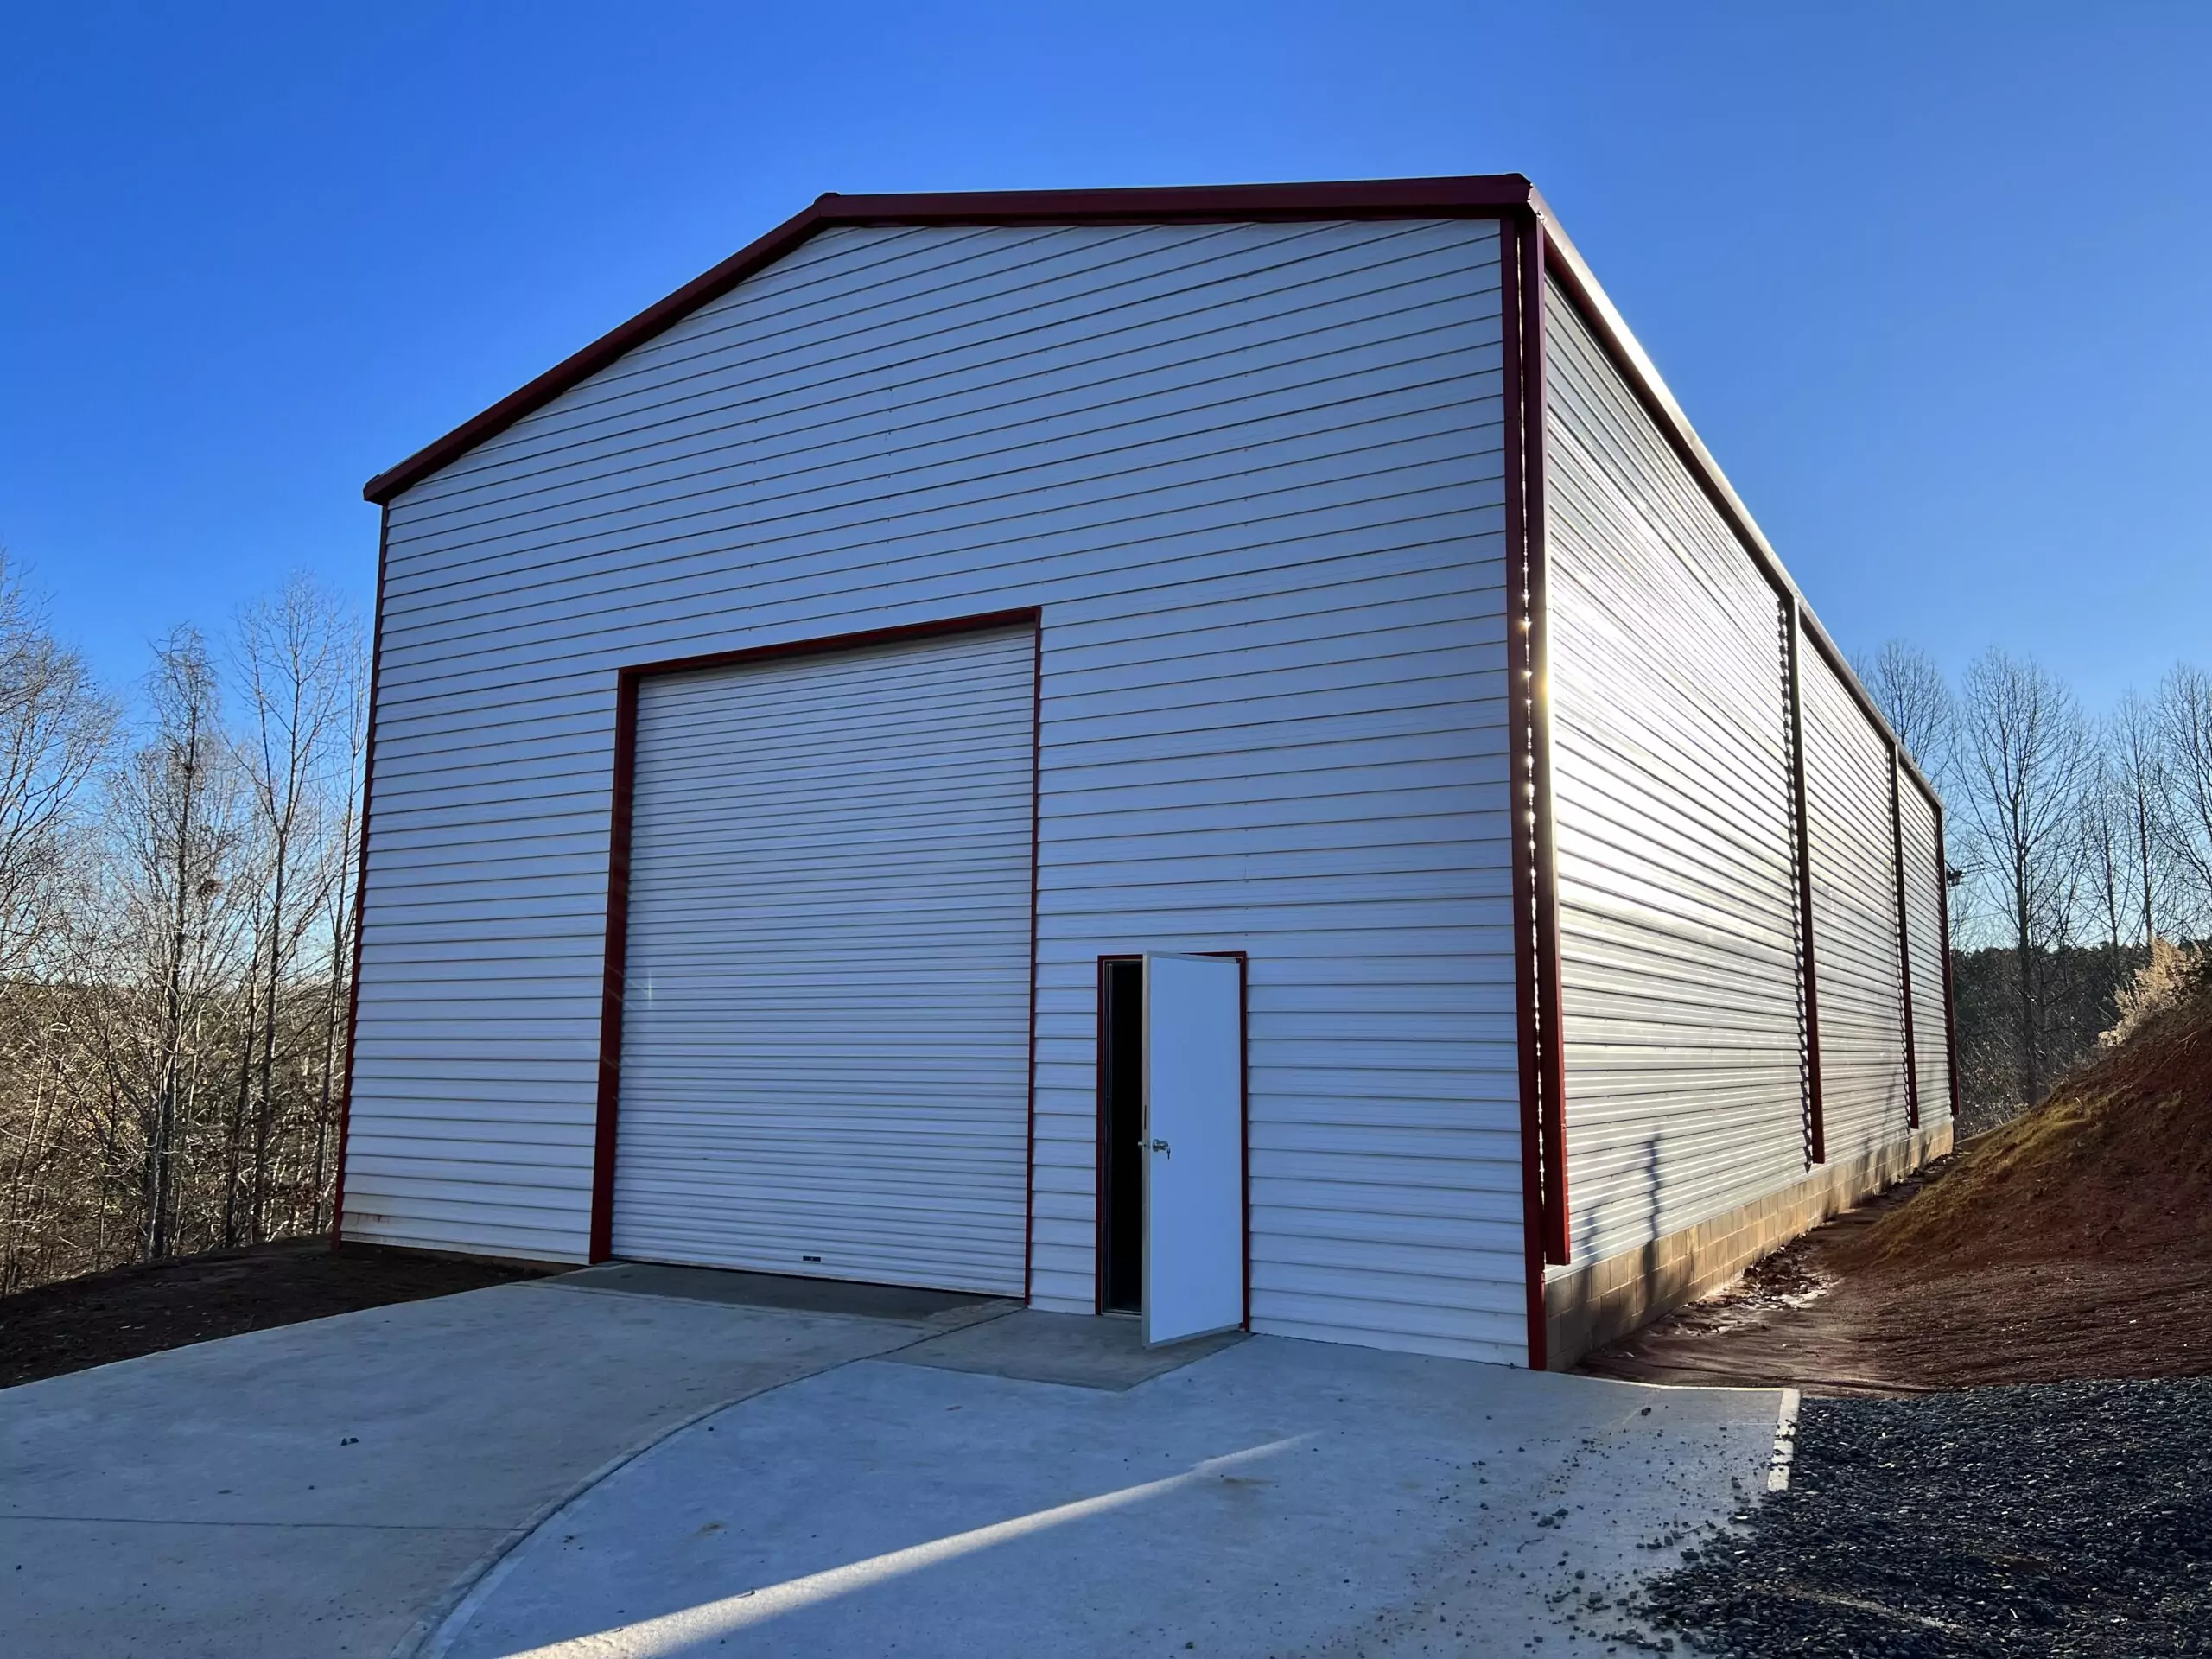 An image of enclosed metal building